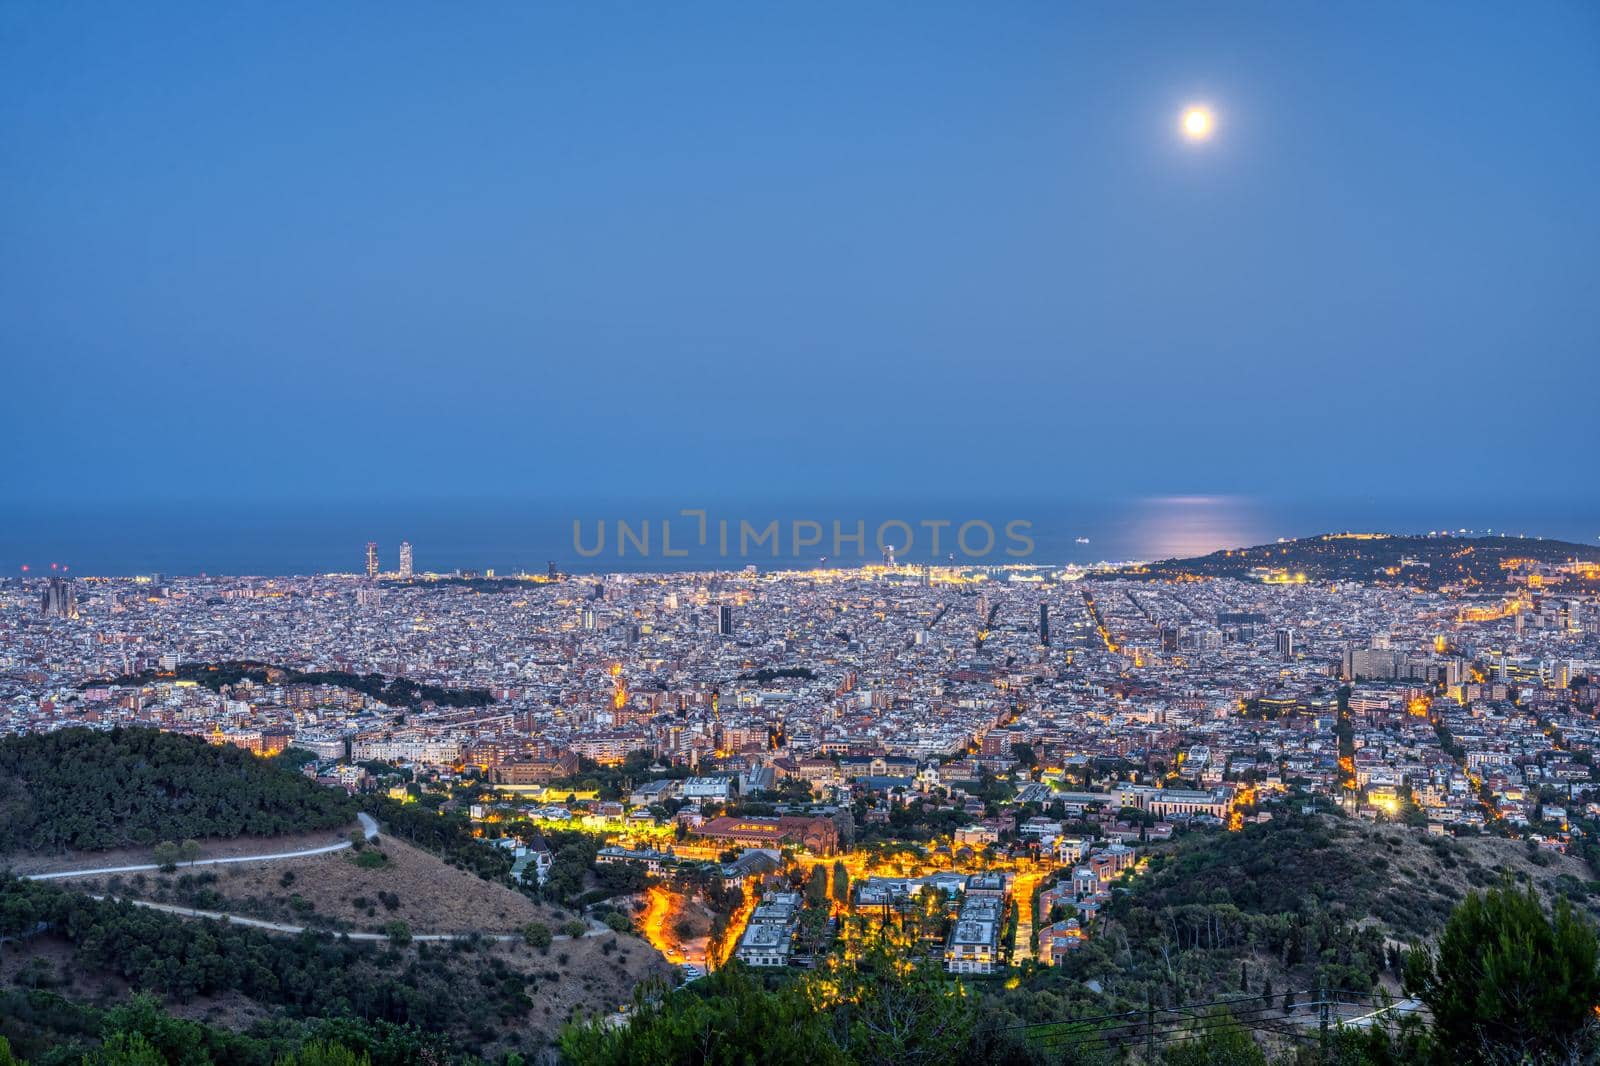 Night view of Barcelona from the Collserola mountain range during full moon